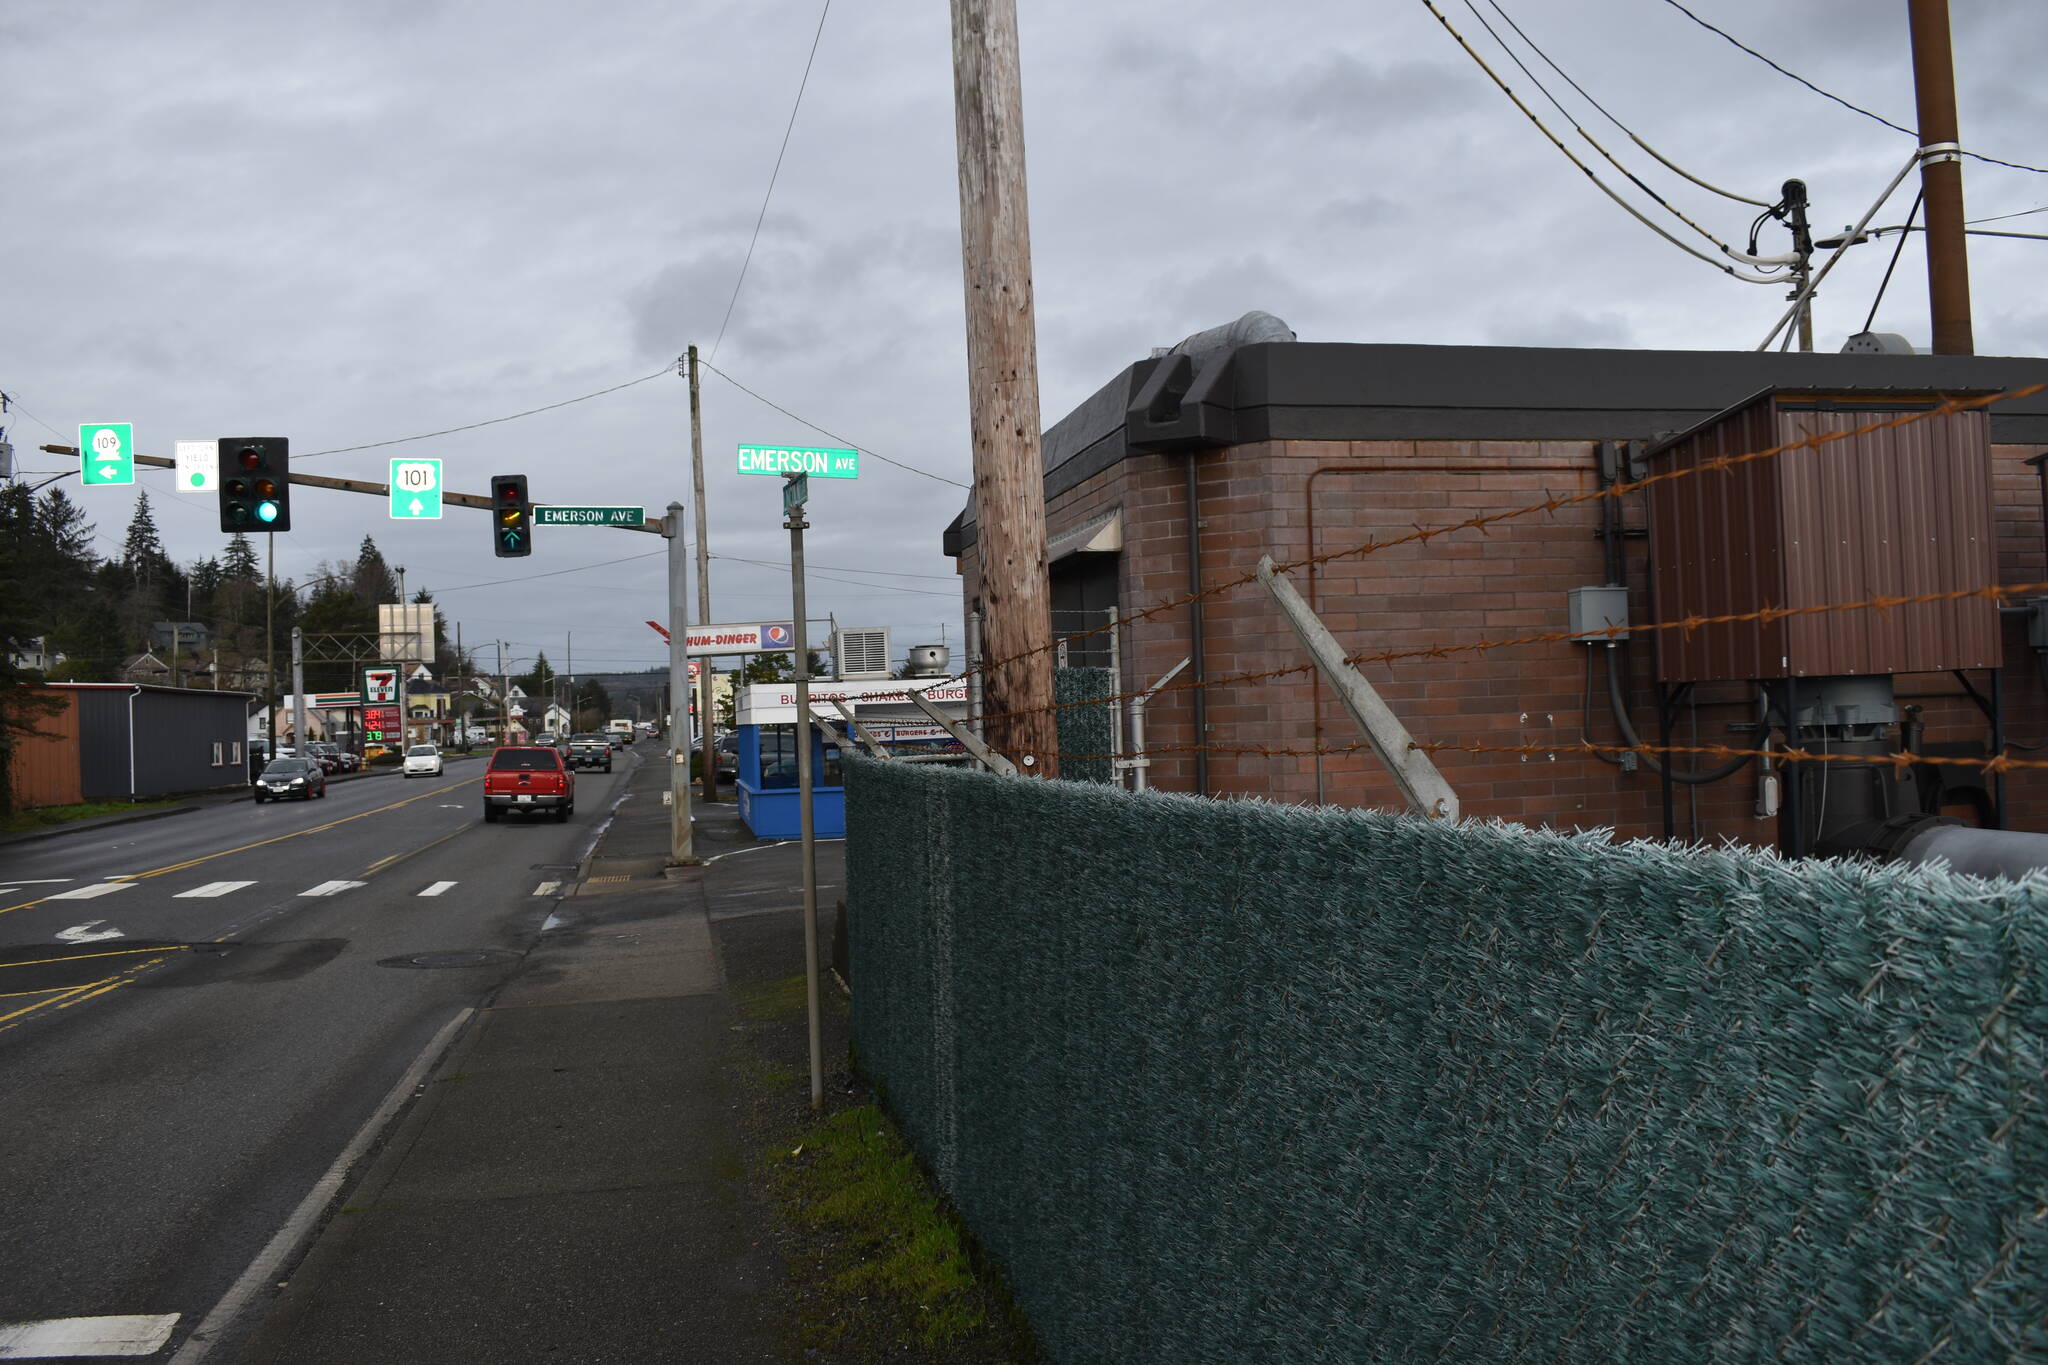 Matthew N. Wells | The Daily World 
The Hoquiam City Council approved the purchase of a new wastewater pump station, which will be built at 107 Lincoln St. The current wastewater pump station sits just south of Al’s Hum-dinger restaurant and is off the intersection of Emerson Avenue and Lincoln Street.